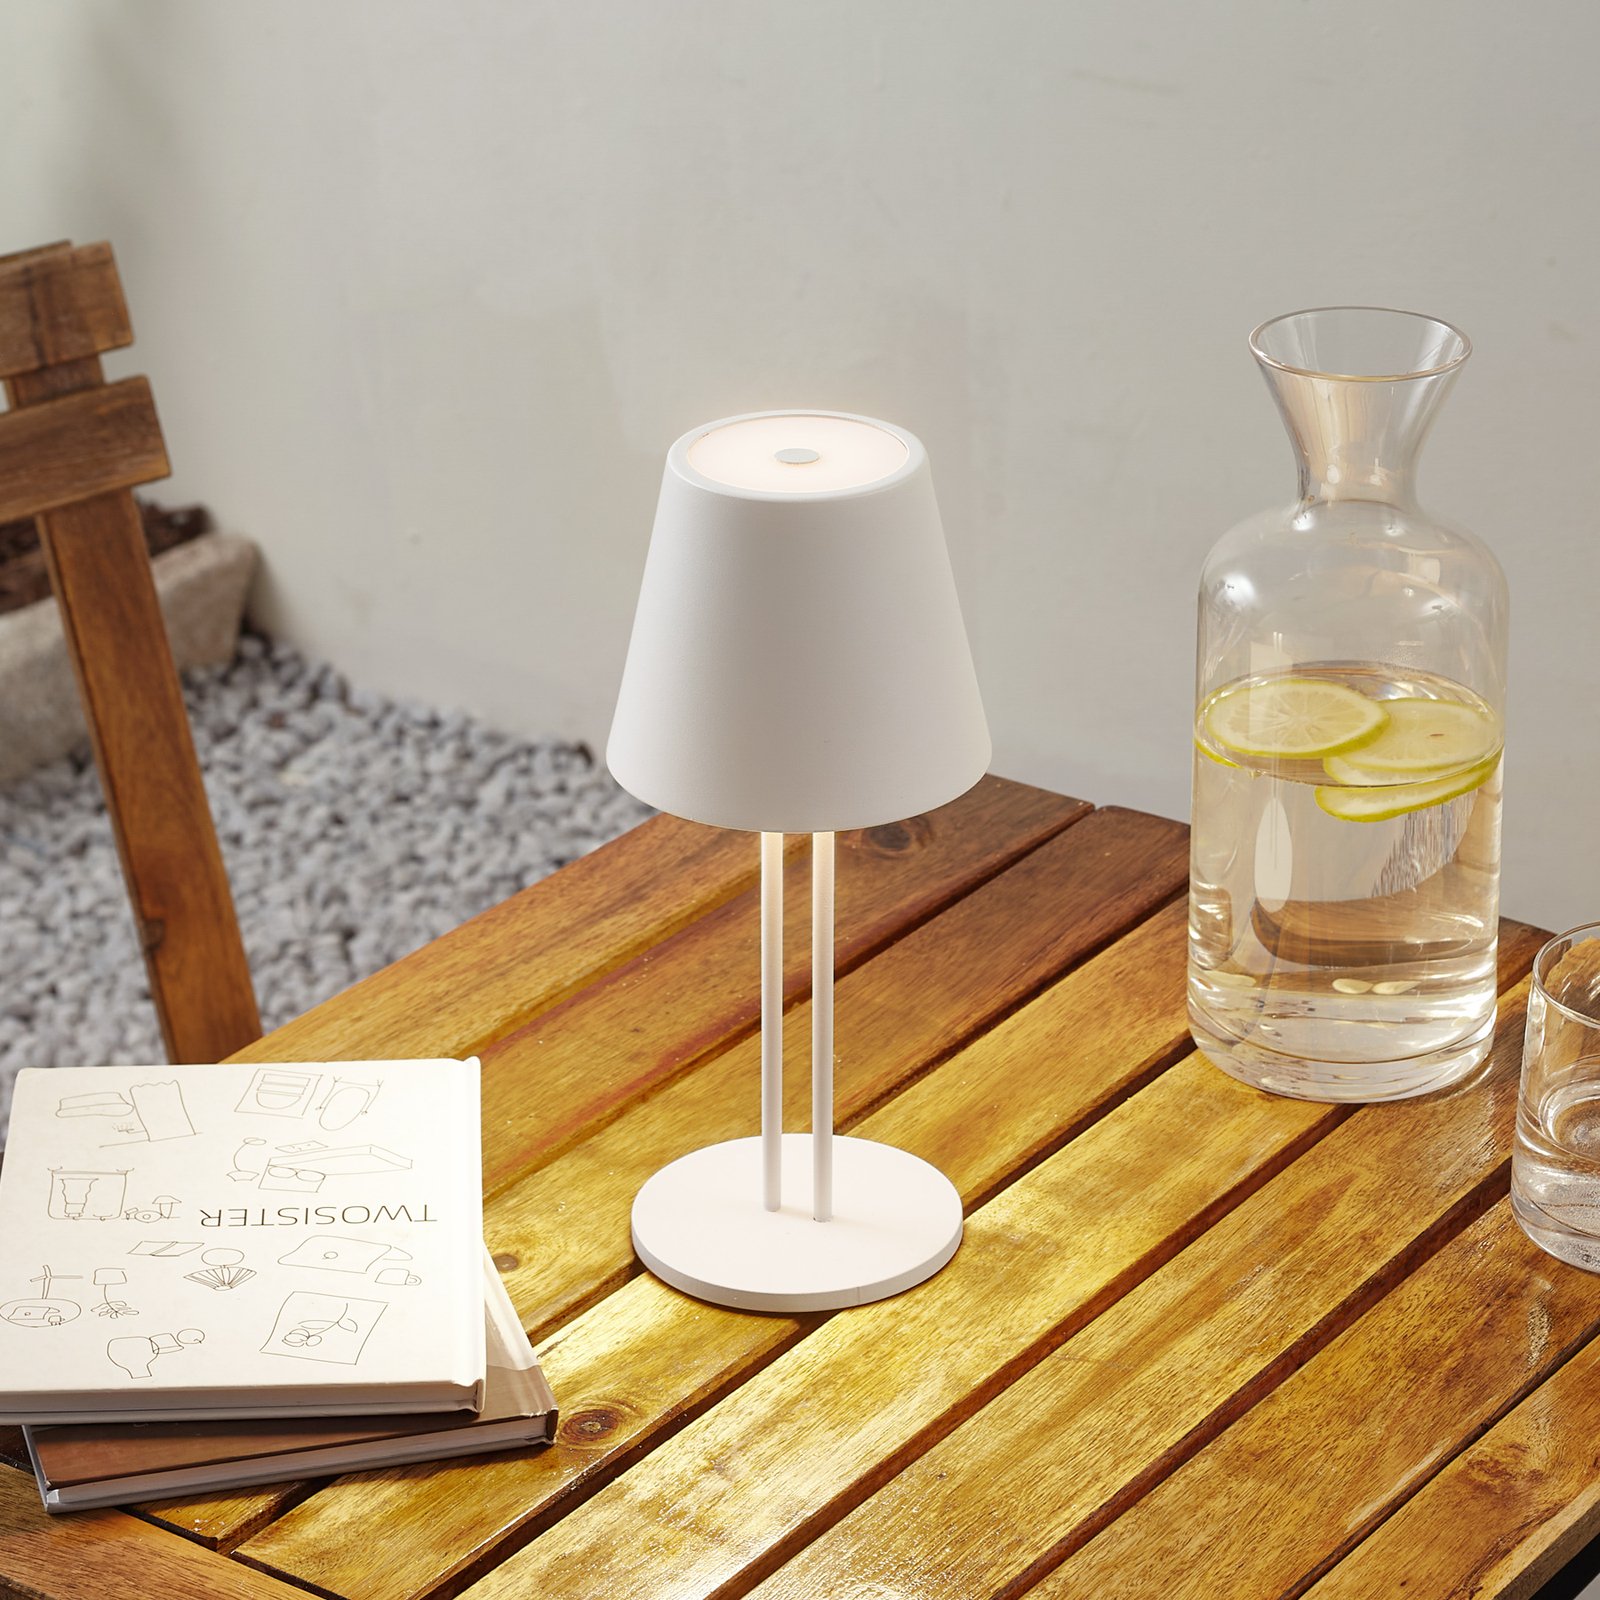 Lindby LED rechargeable table lamp Janea TWIN, white, metal